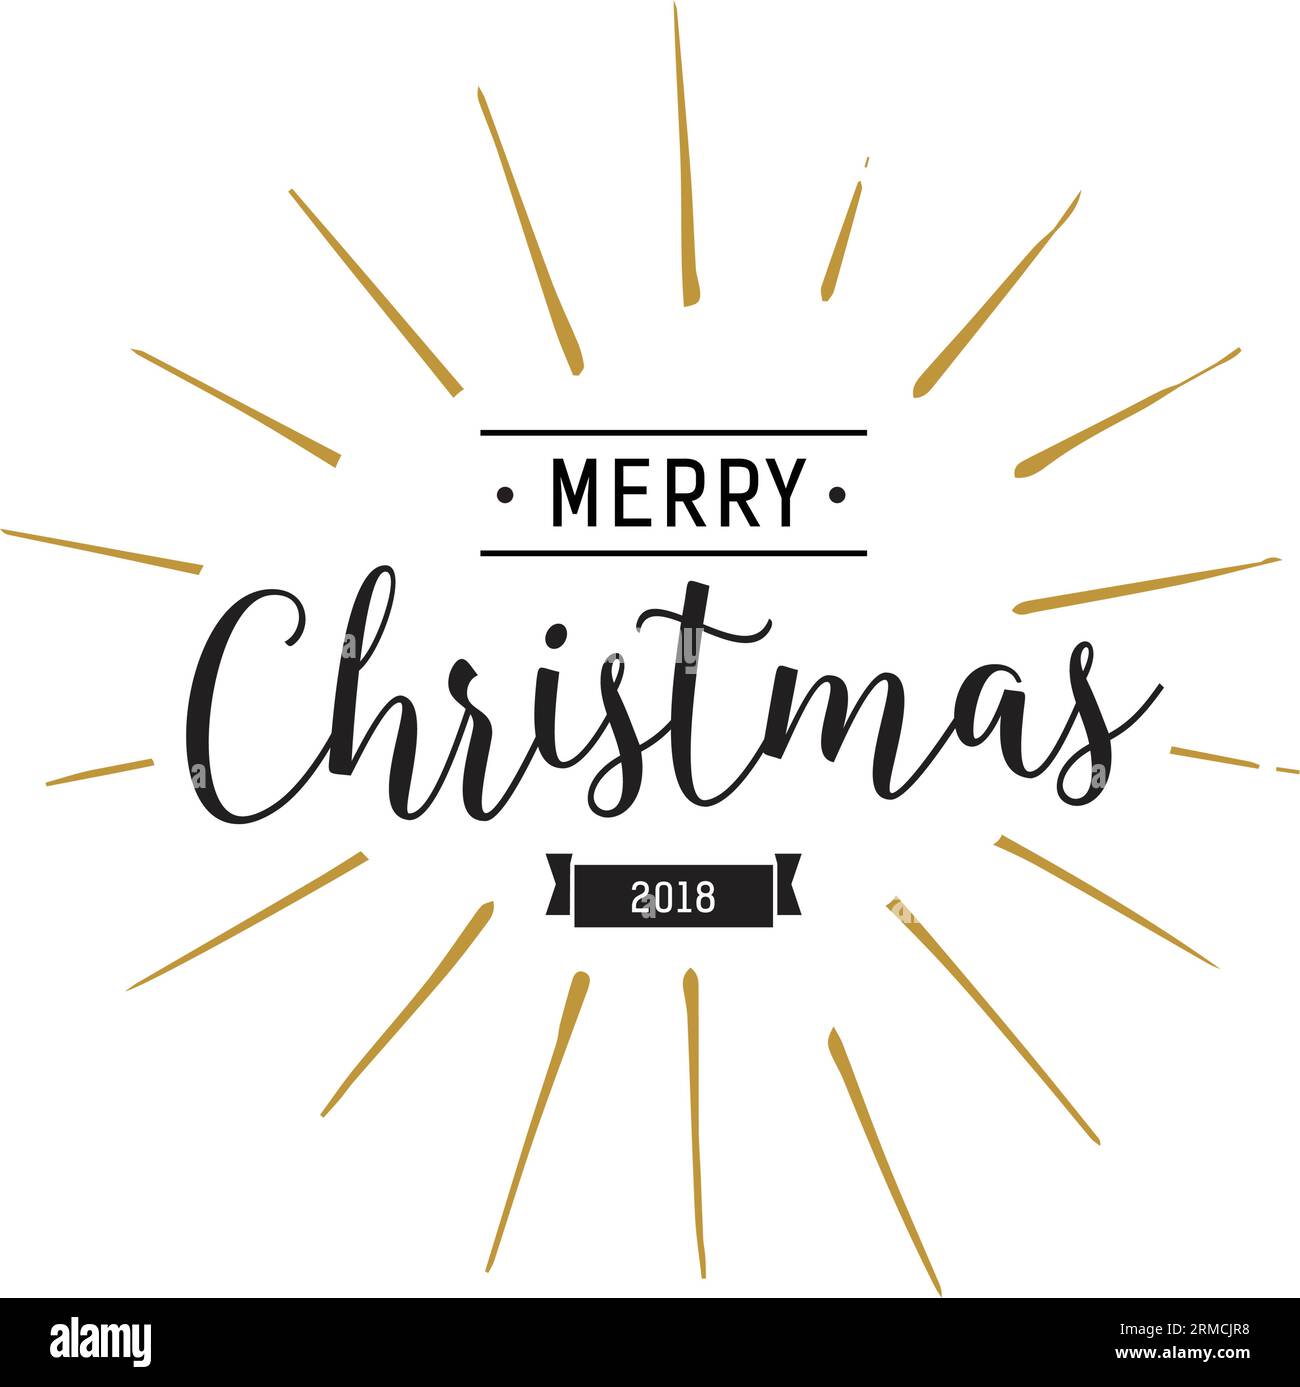 Merry Christmas Lettering and Ribbon Stock Vector